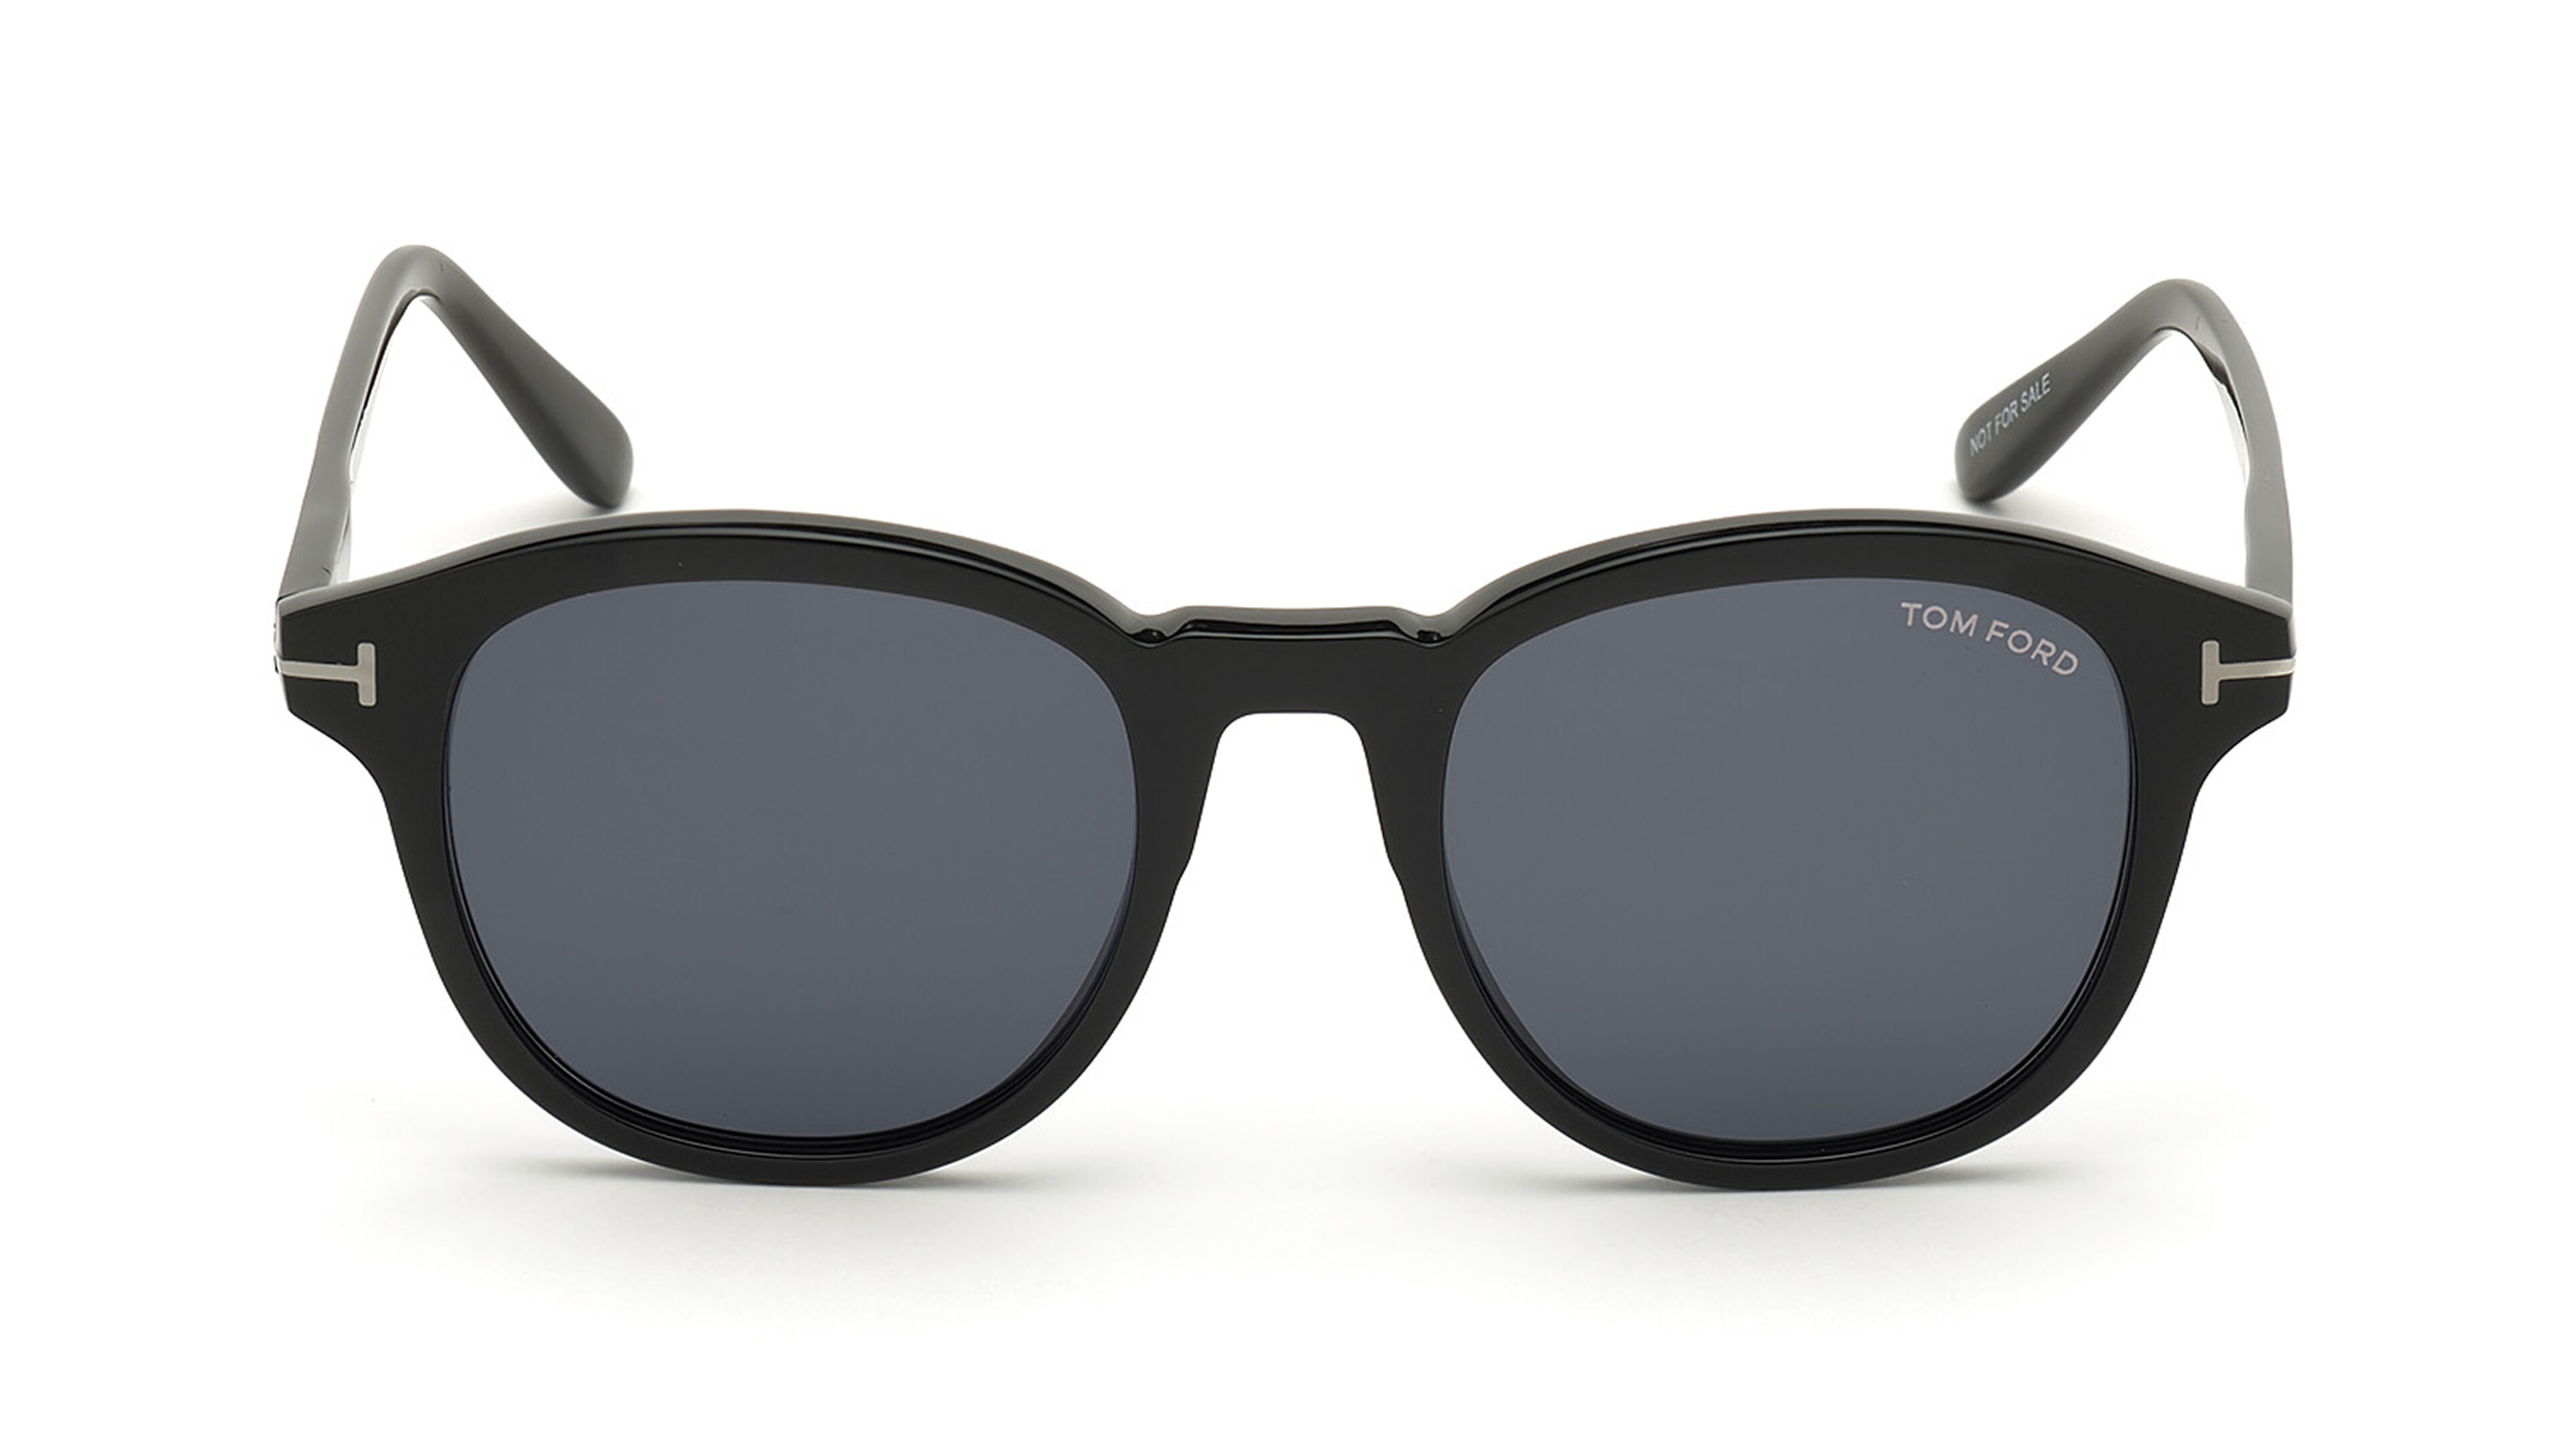 [products.image.front] Tom Ford FT0752-N 01A Sonnenbrille